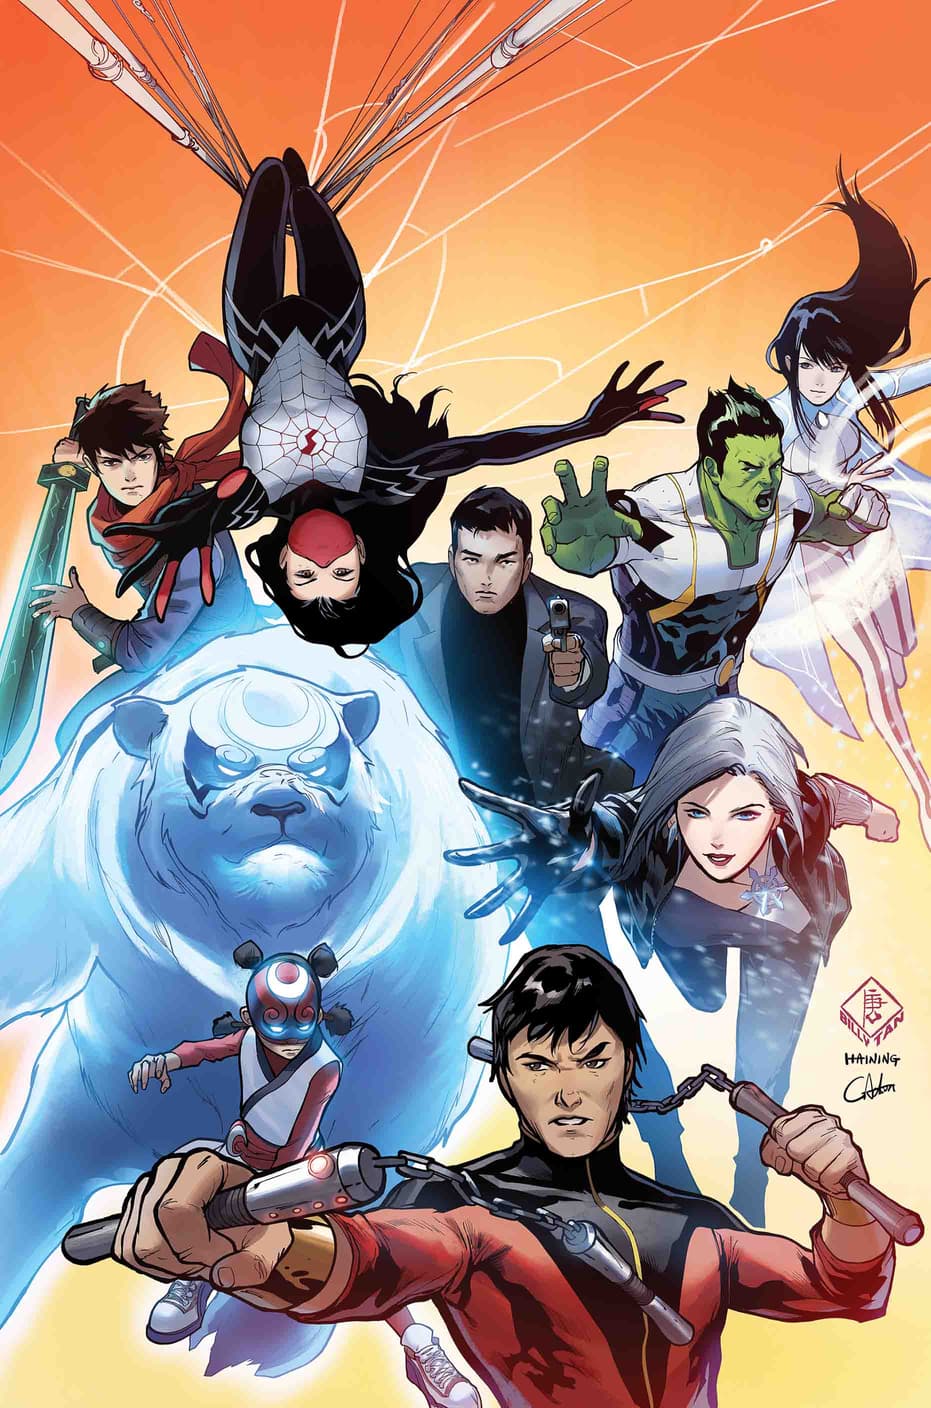 WAR OF THE REALMS: NEW AGENTS OF ATLAS #1